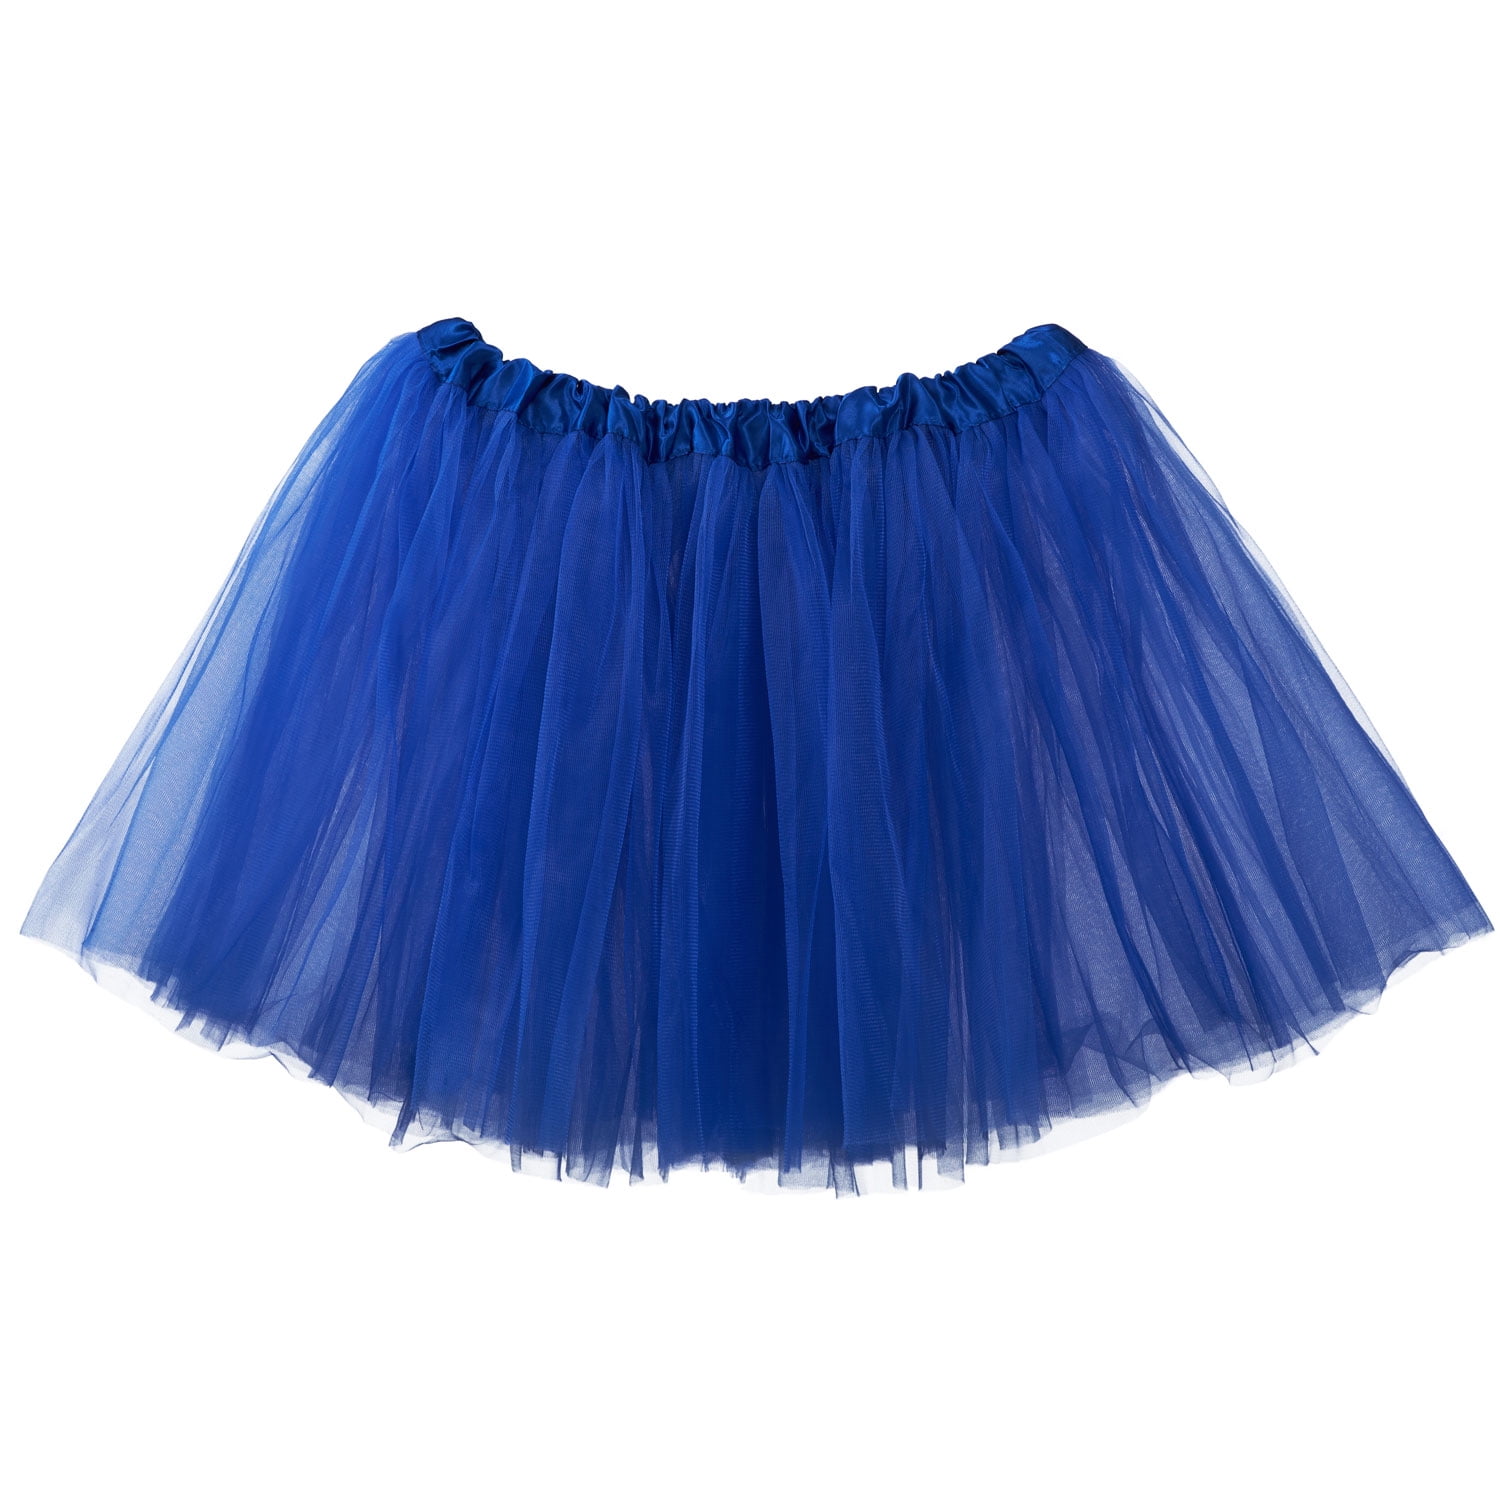 Tutus Skirt for Women Halloween Women's Costume Party Favor Merry Christmas Accessories 